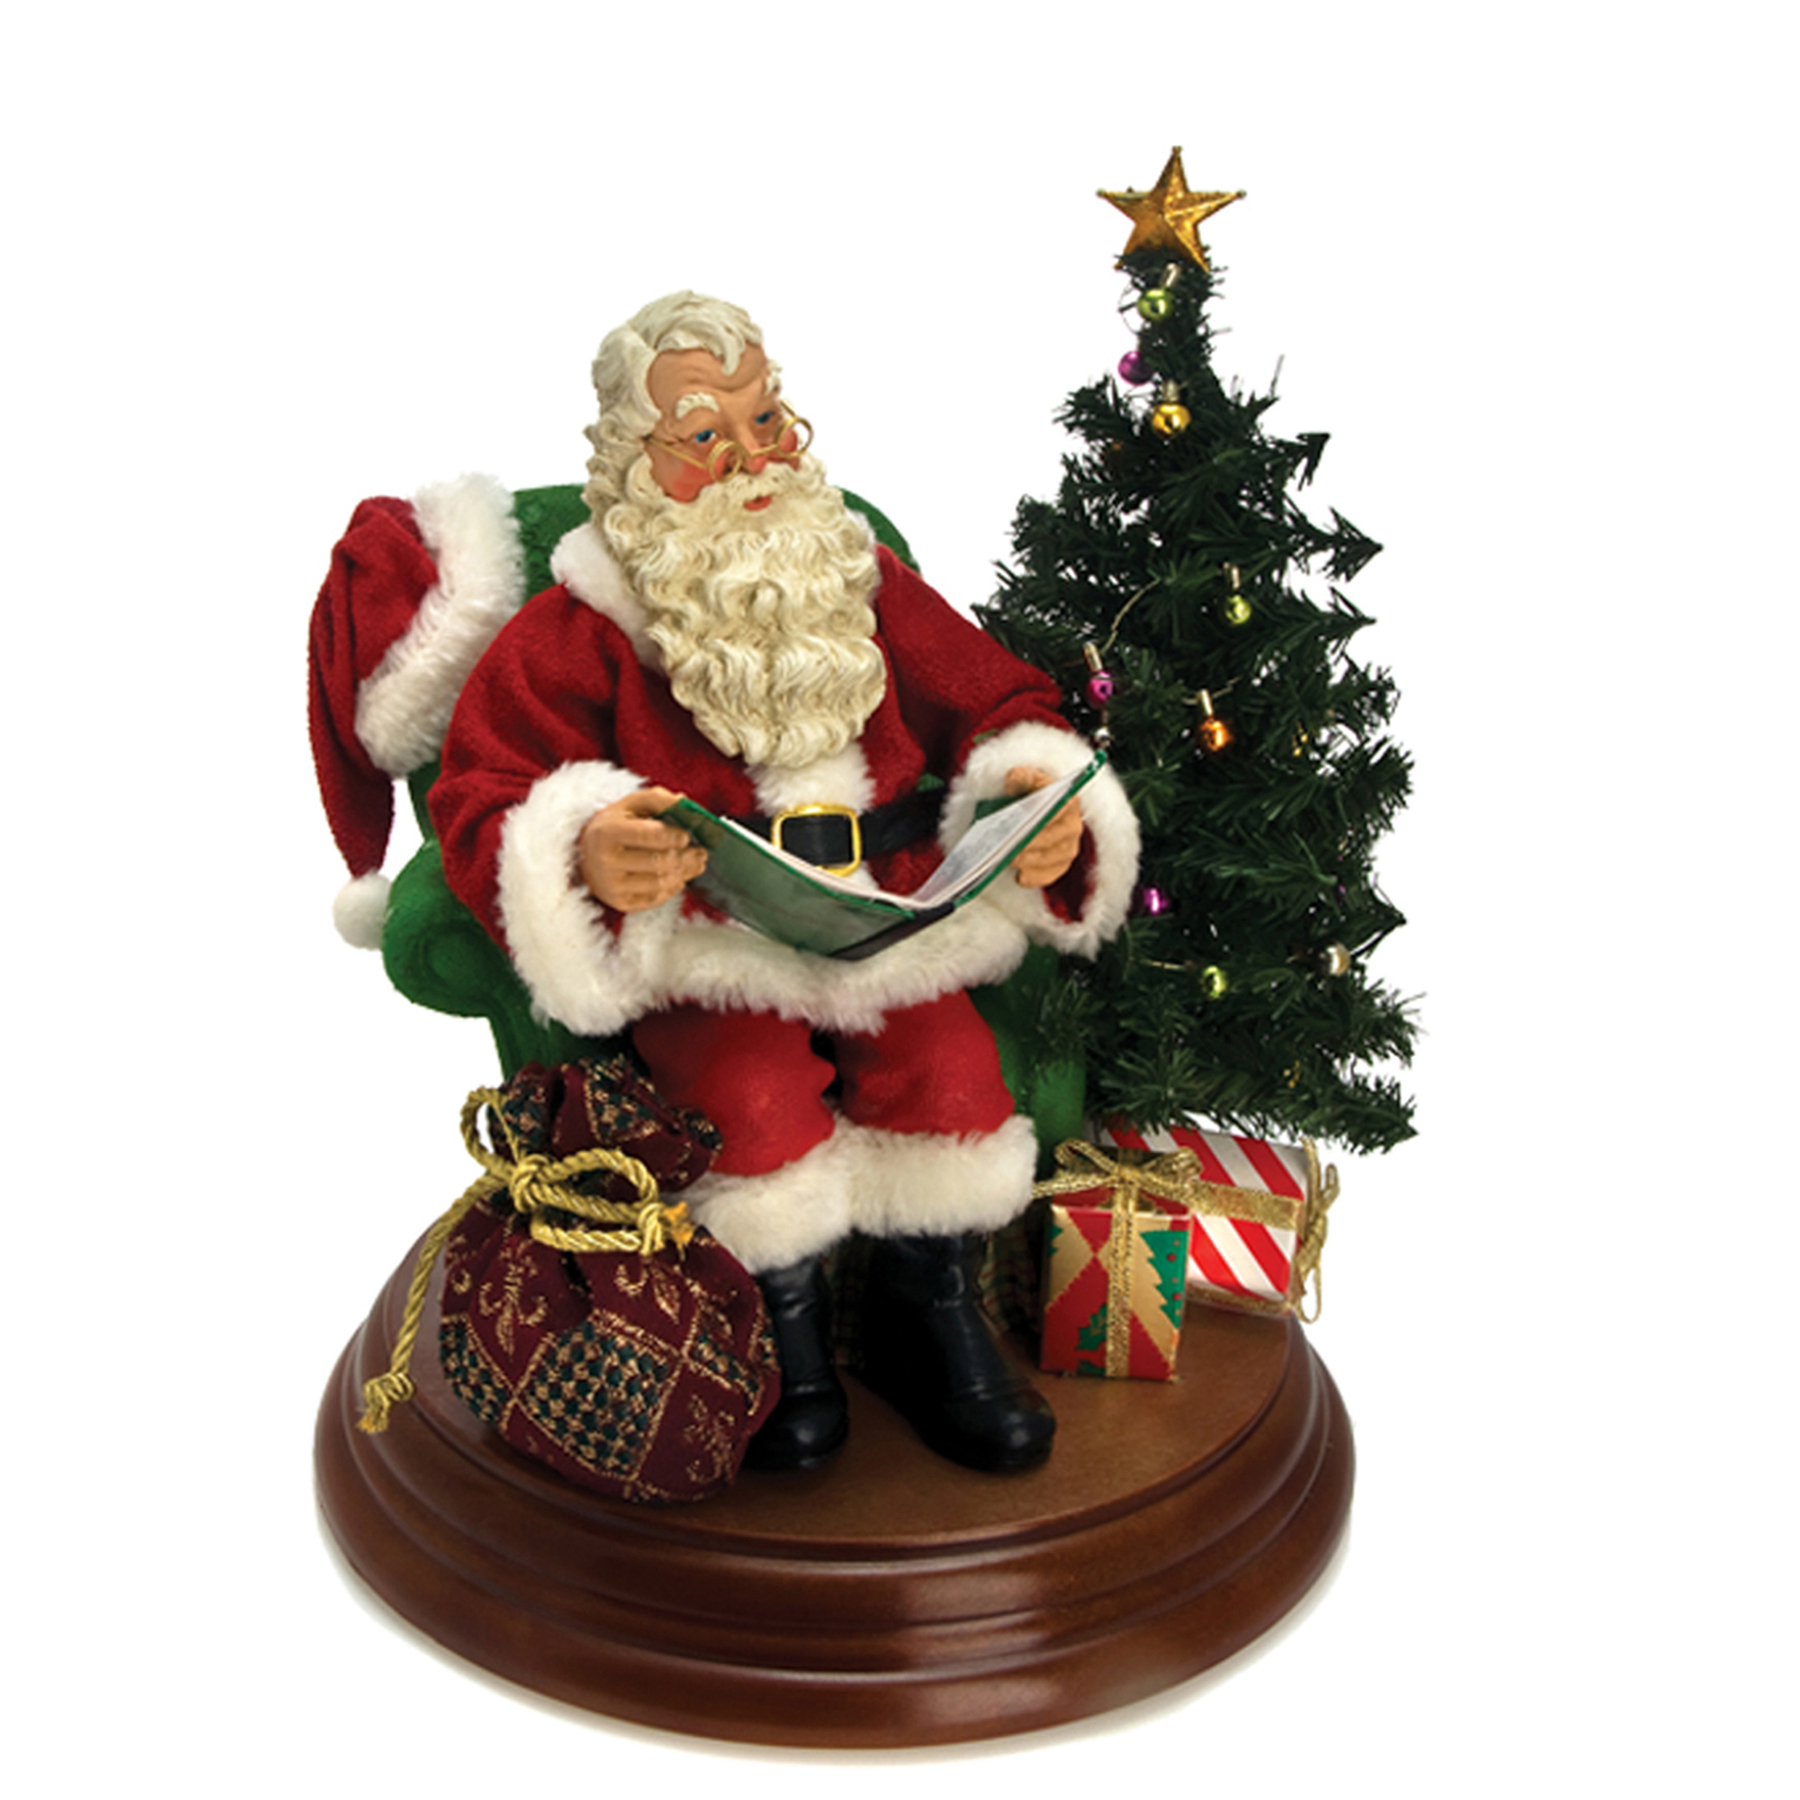 Kurt Adler 8" Fabriche' Battery-Operated Christmas Story-Telling Santa with Sound